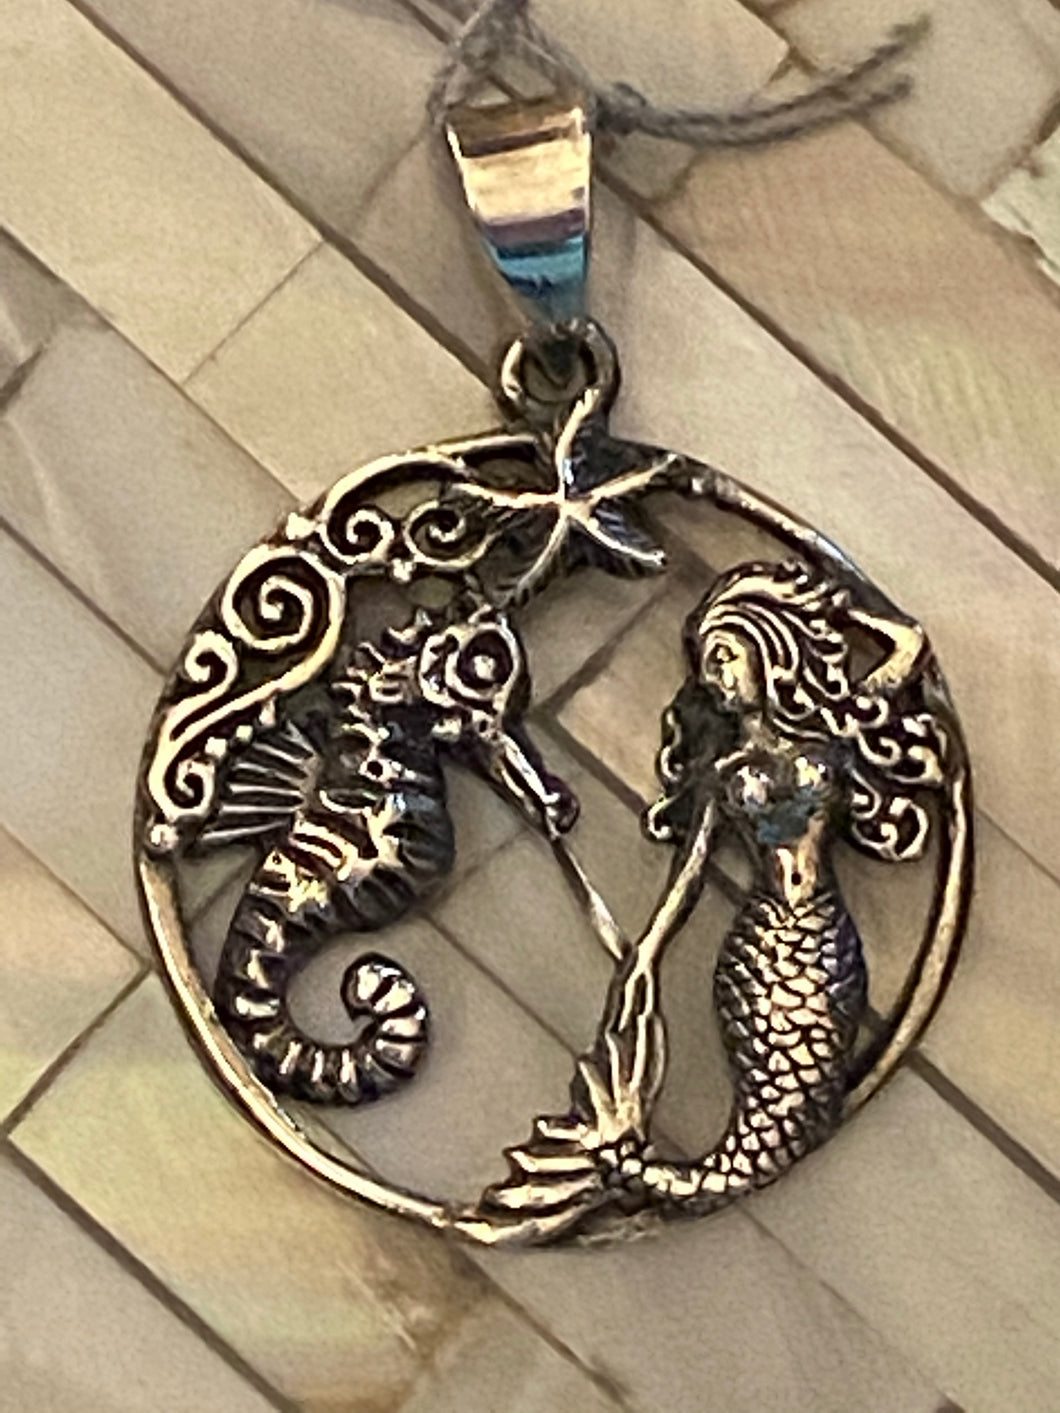 Mermaid & Seahorse Sterling Silver Pendant Jewelry. Free Shipping!